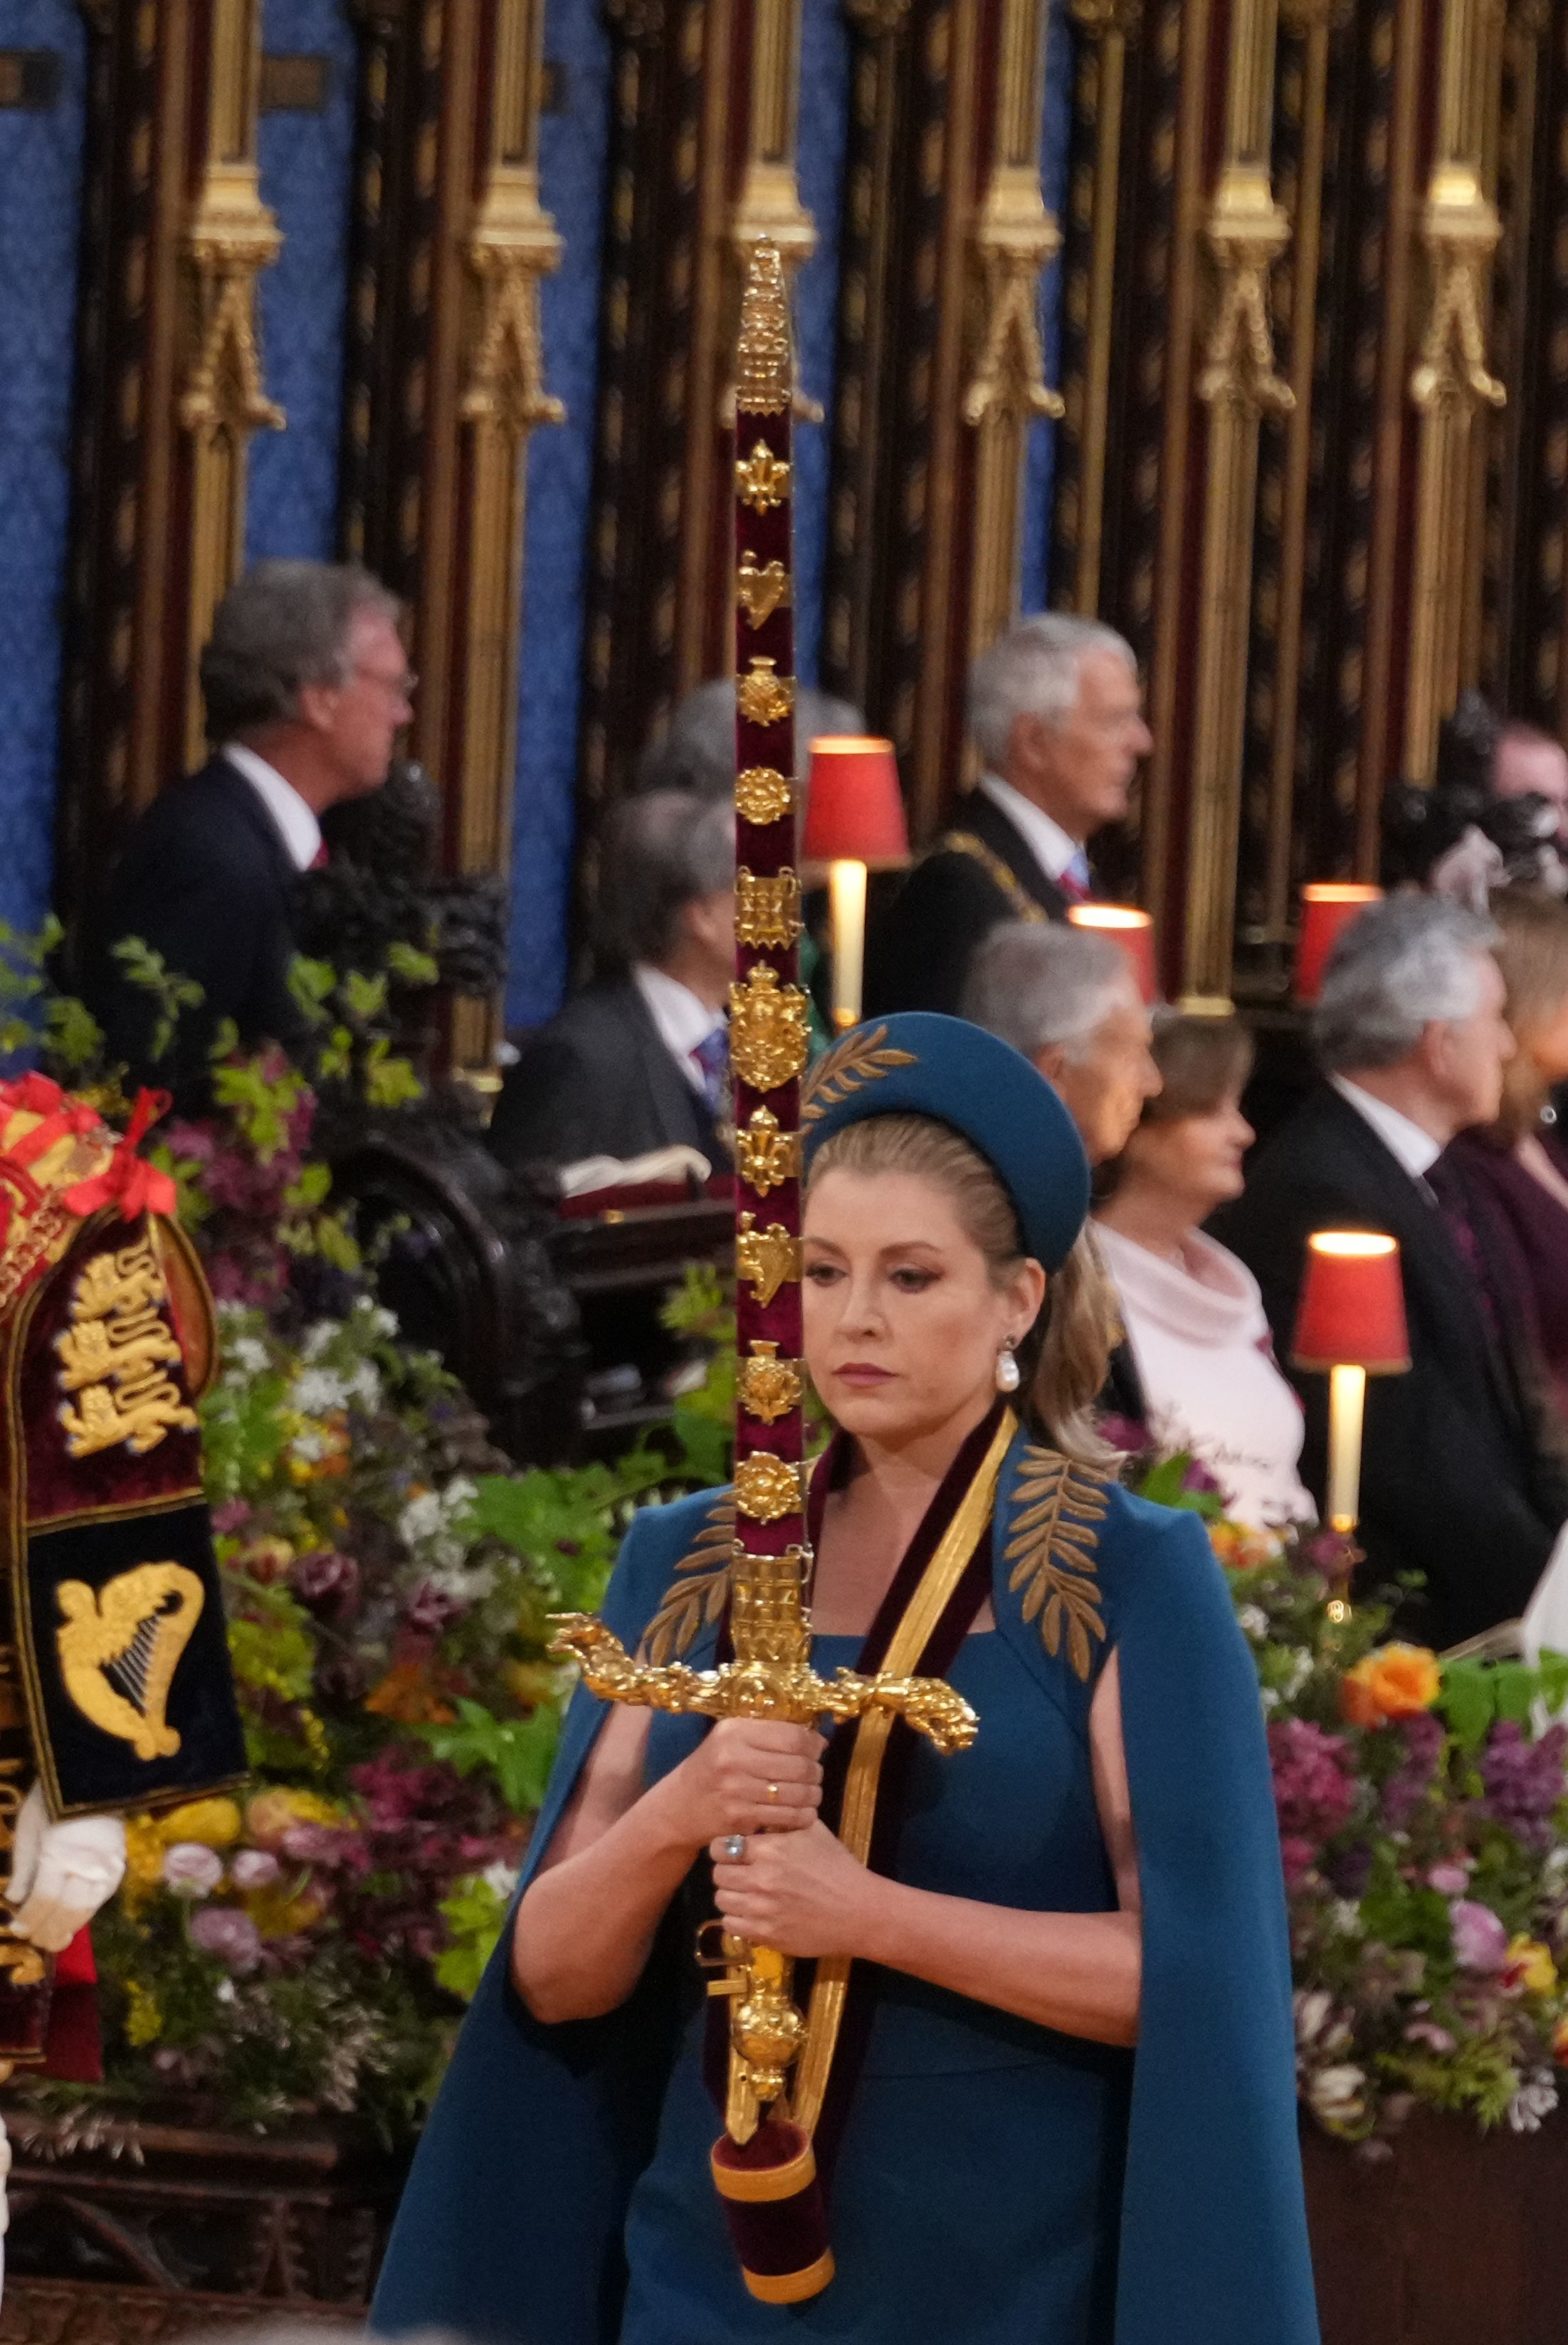 Penny Mourdant holding the coronation sword